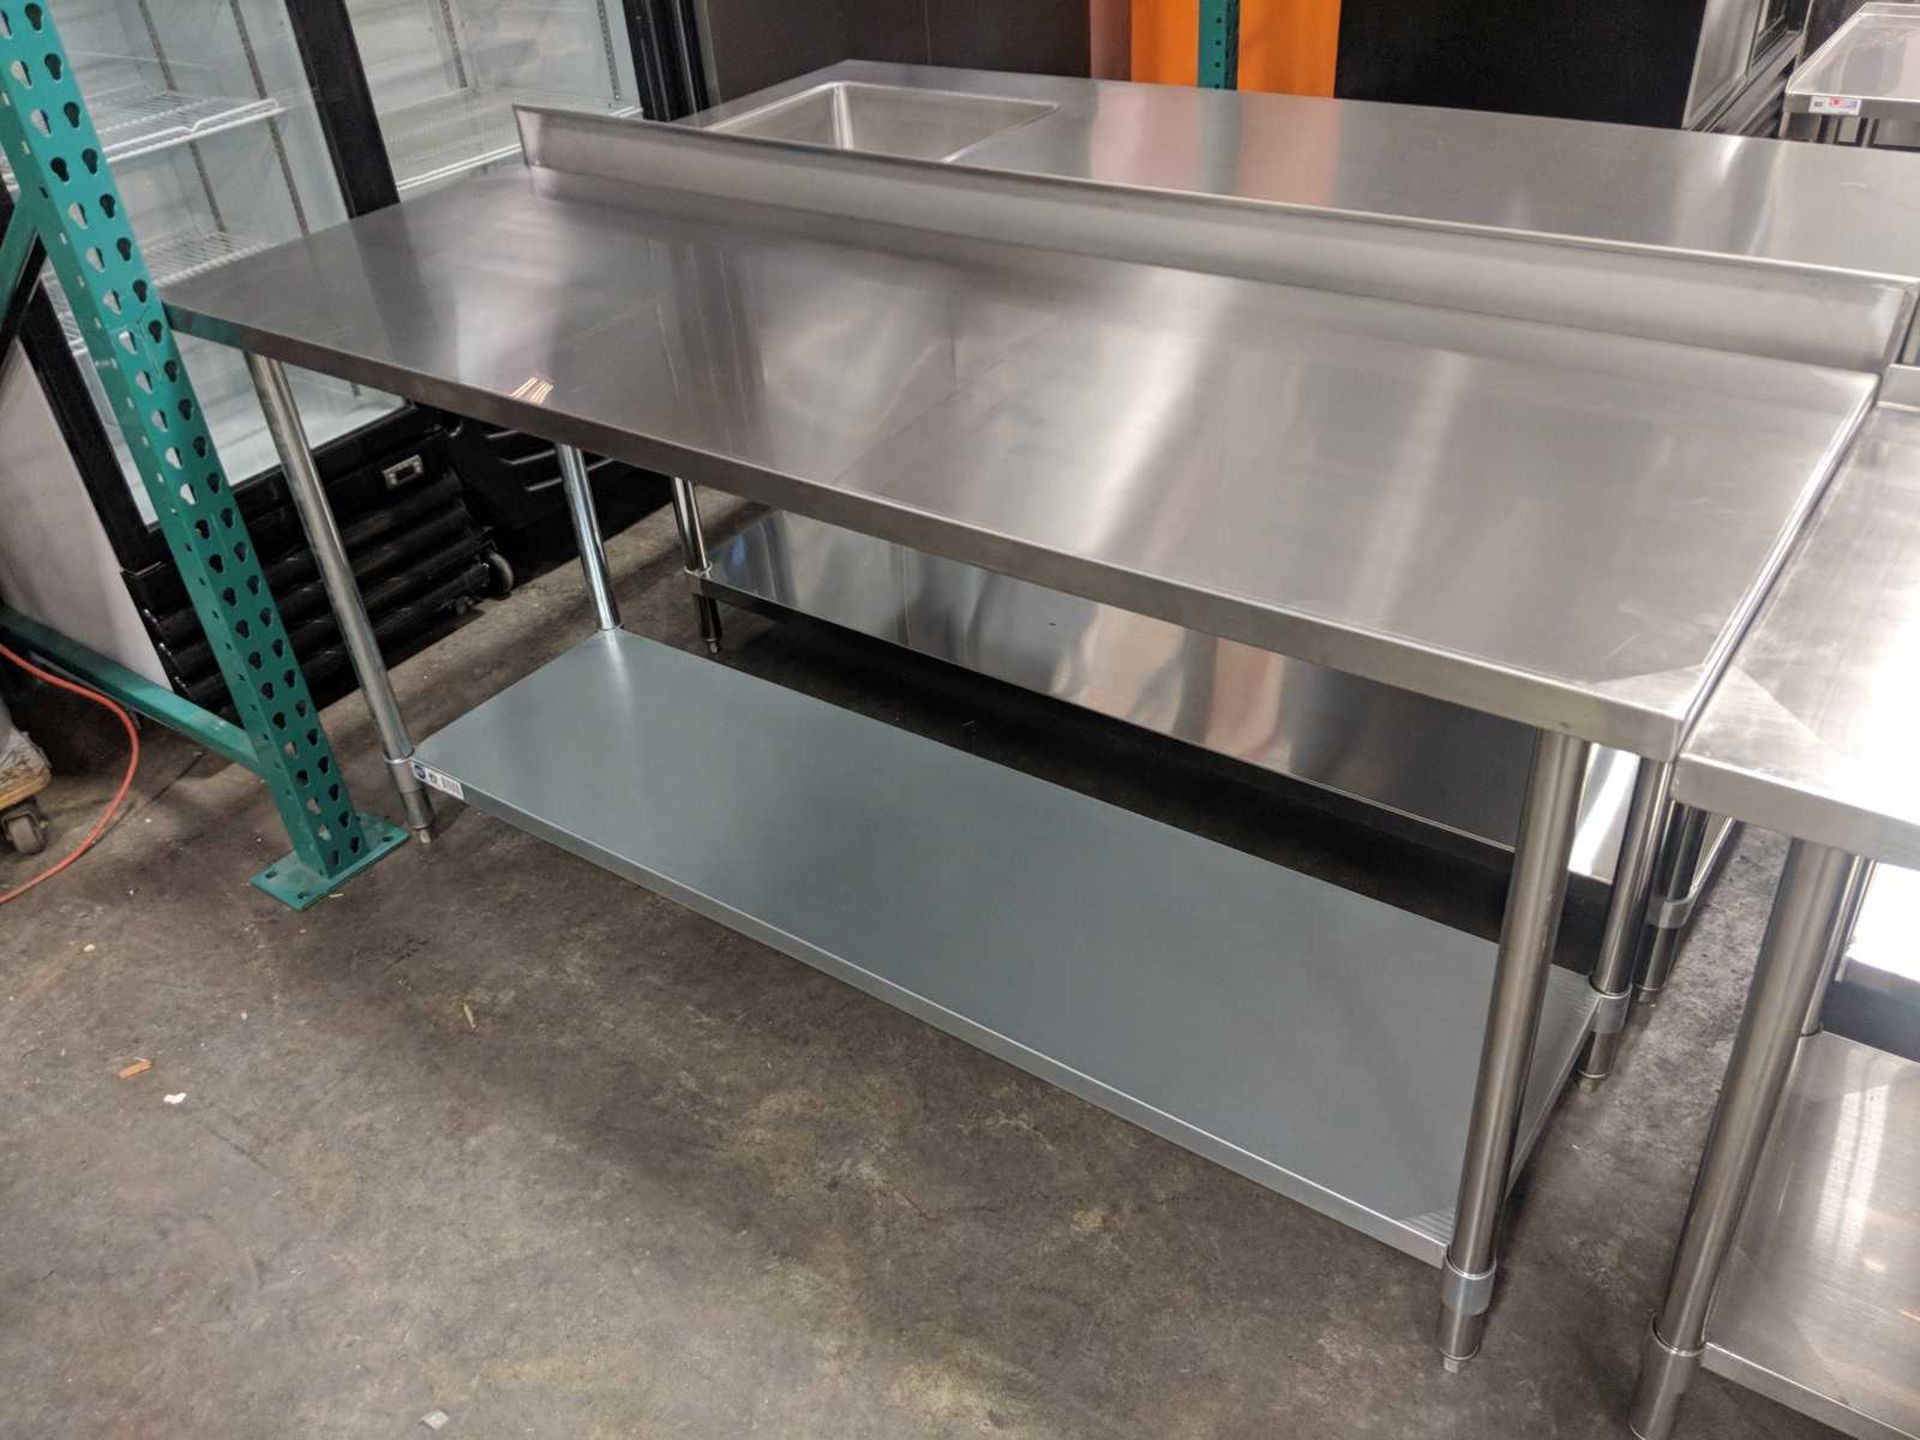 24" x 72" Stainless Steel Work Table - Image 2 of 2